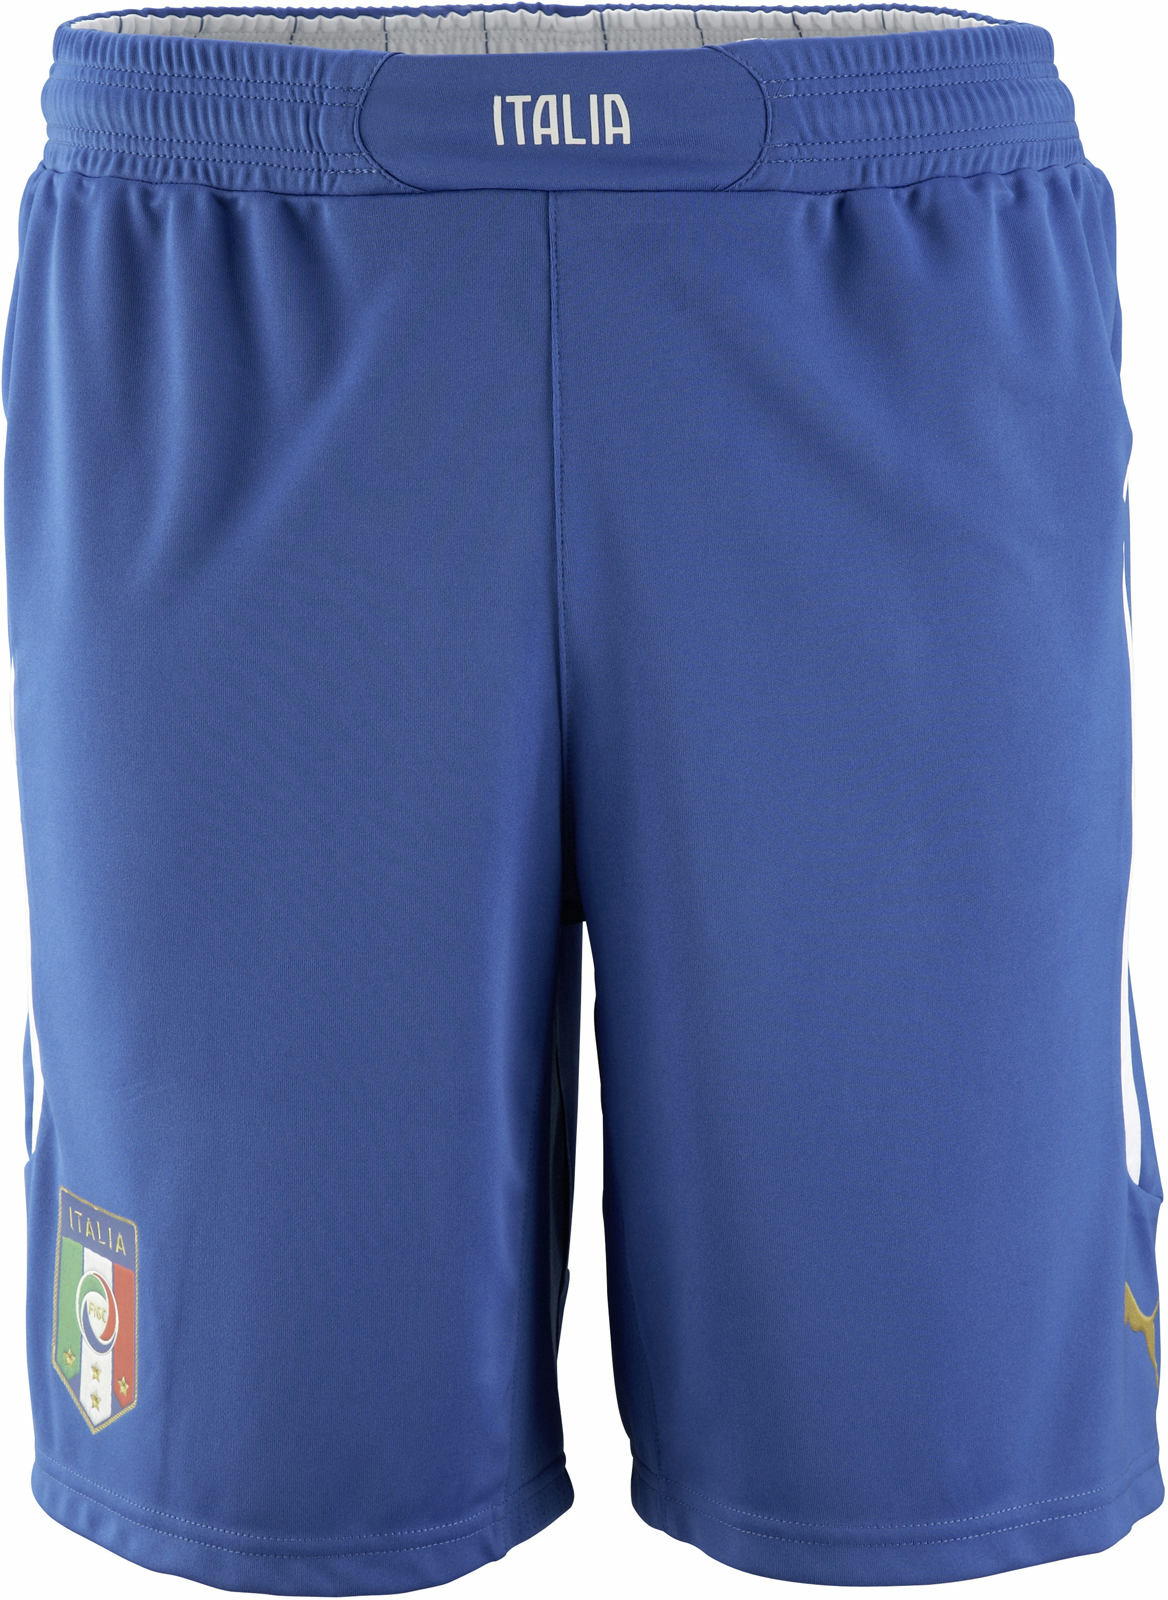 Puma Italy 2014 World Cup Home and Away Kits Released - Footy Headlines